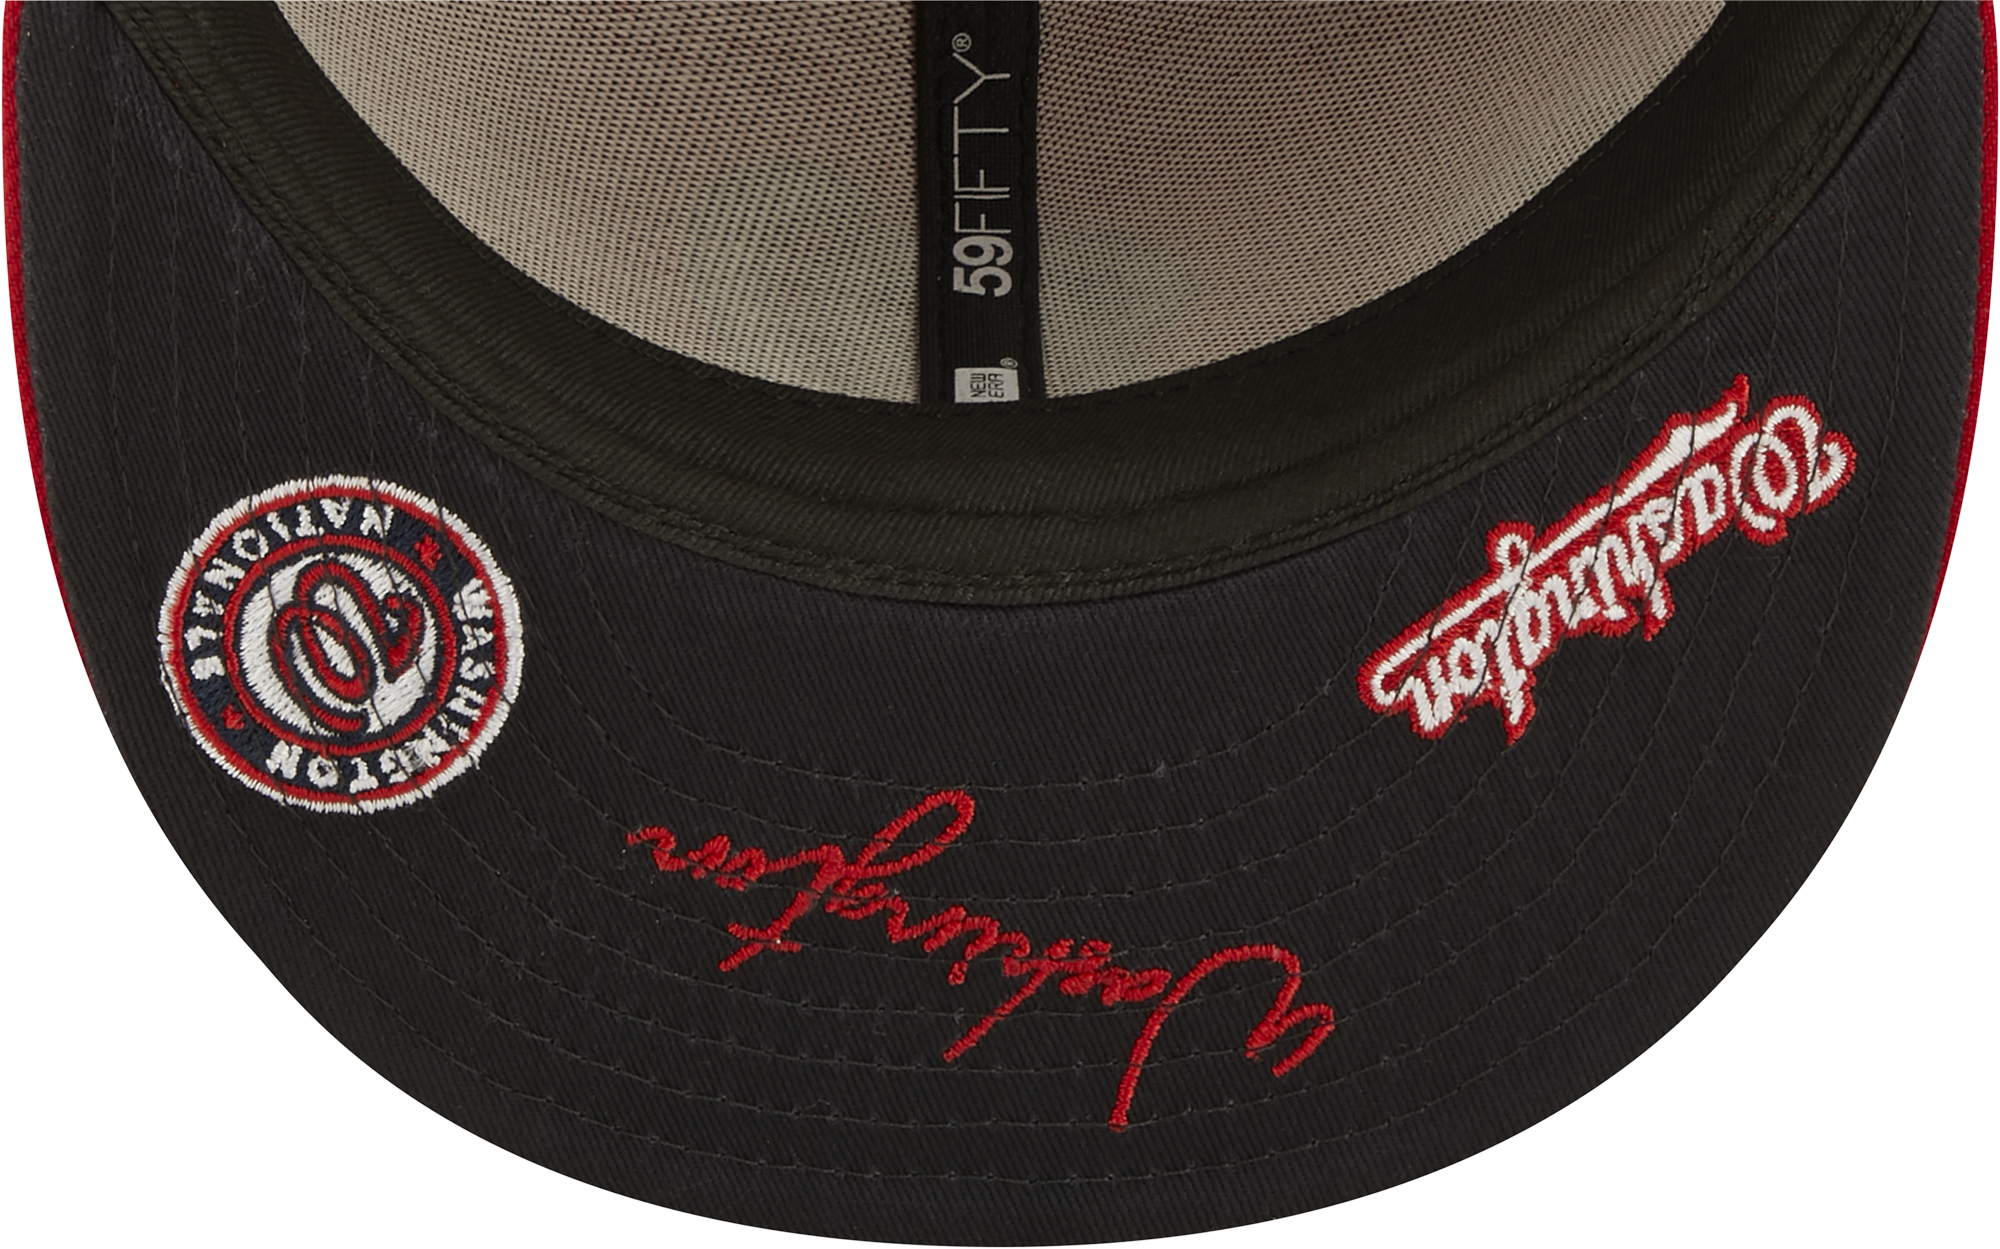 New Era Nationals City Identity Fitted Cap